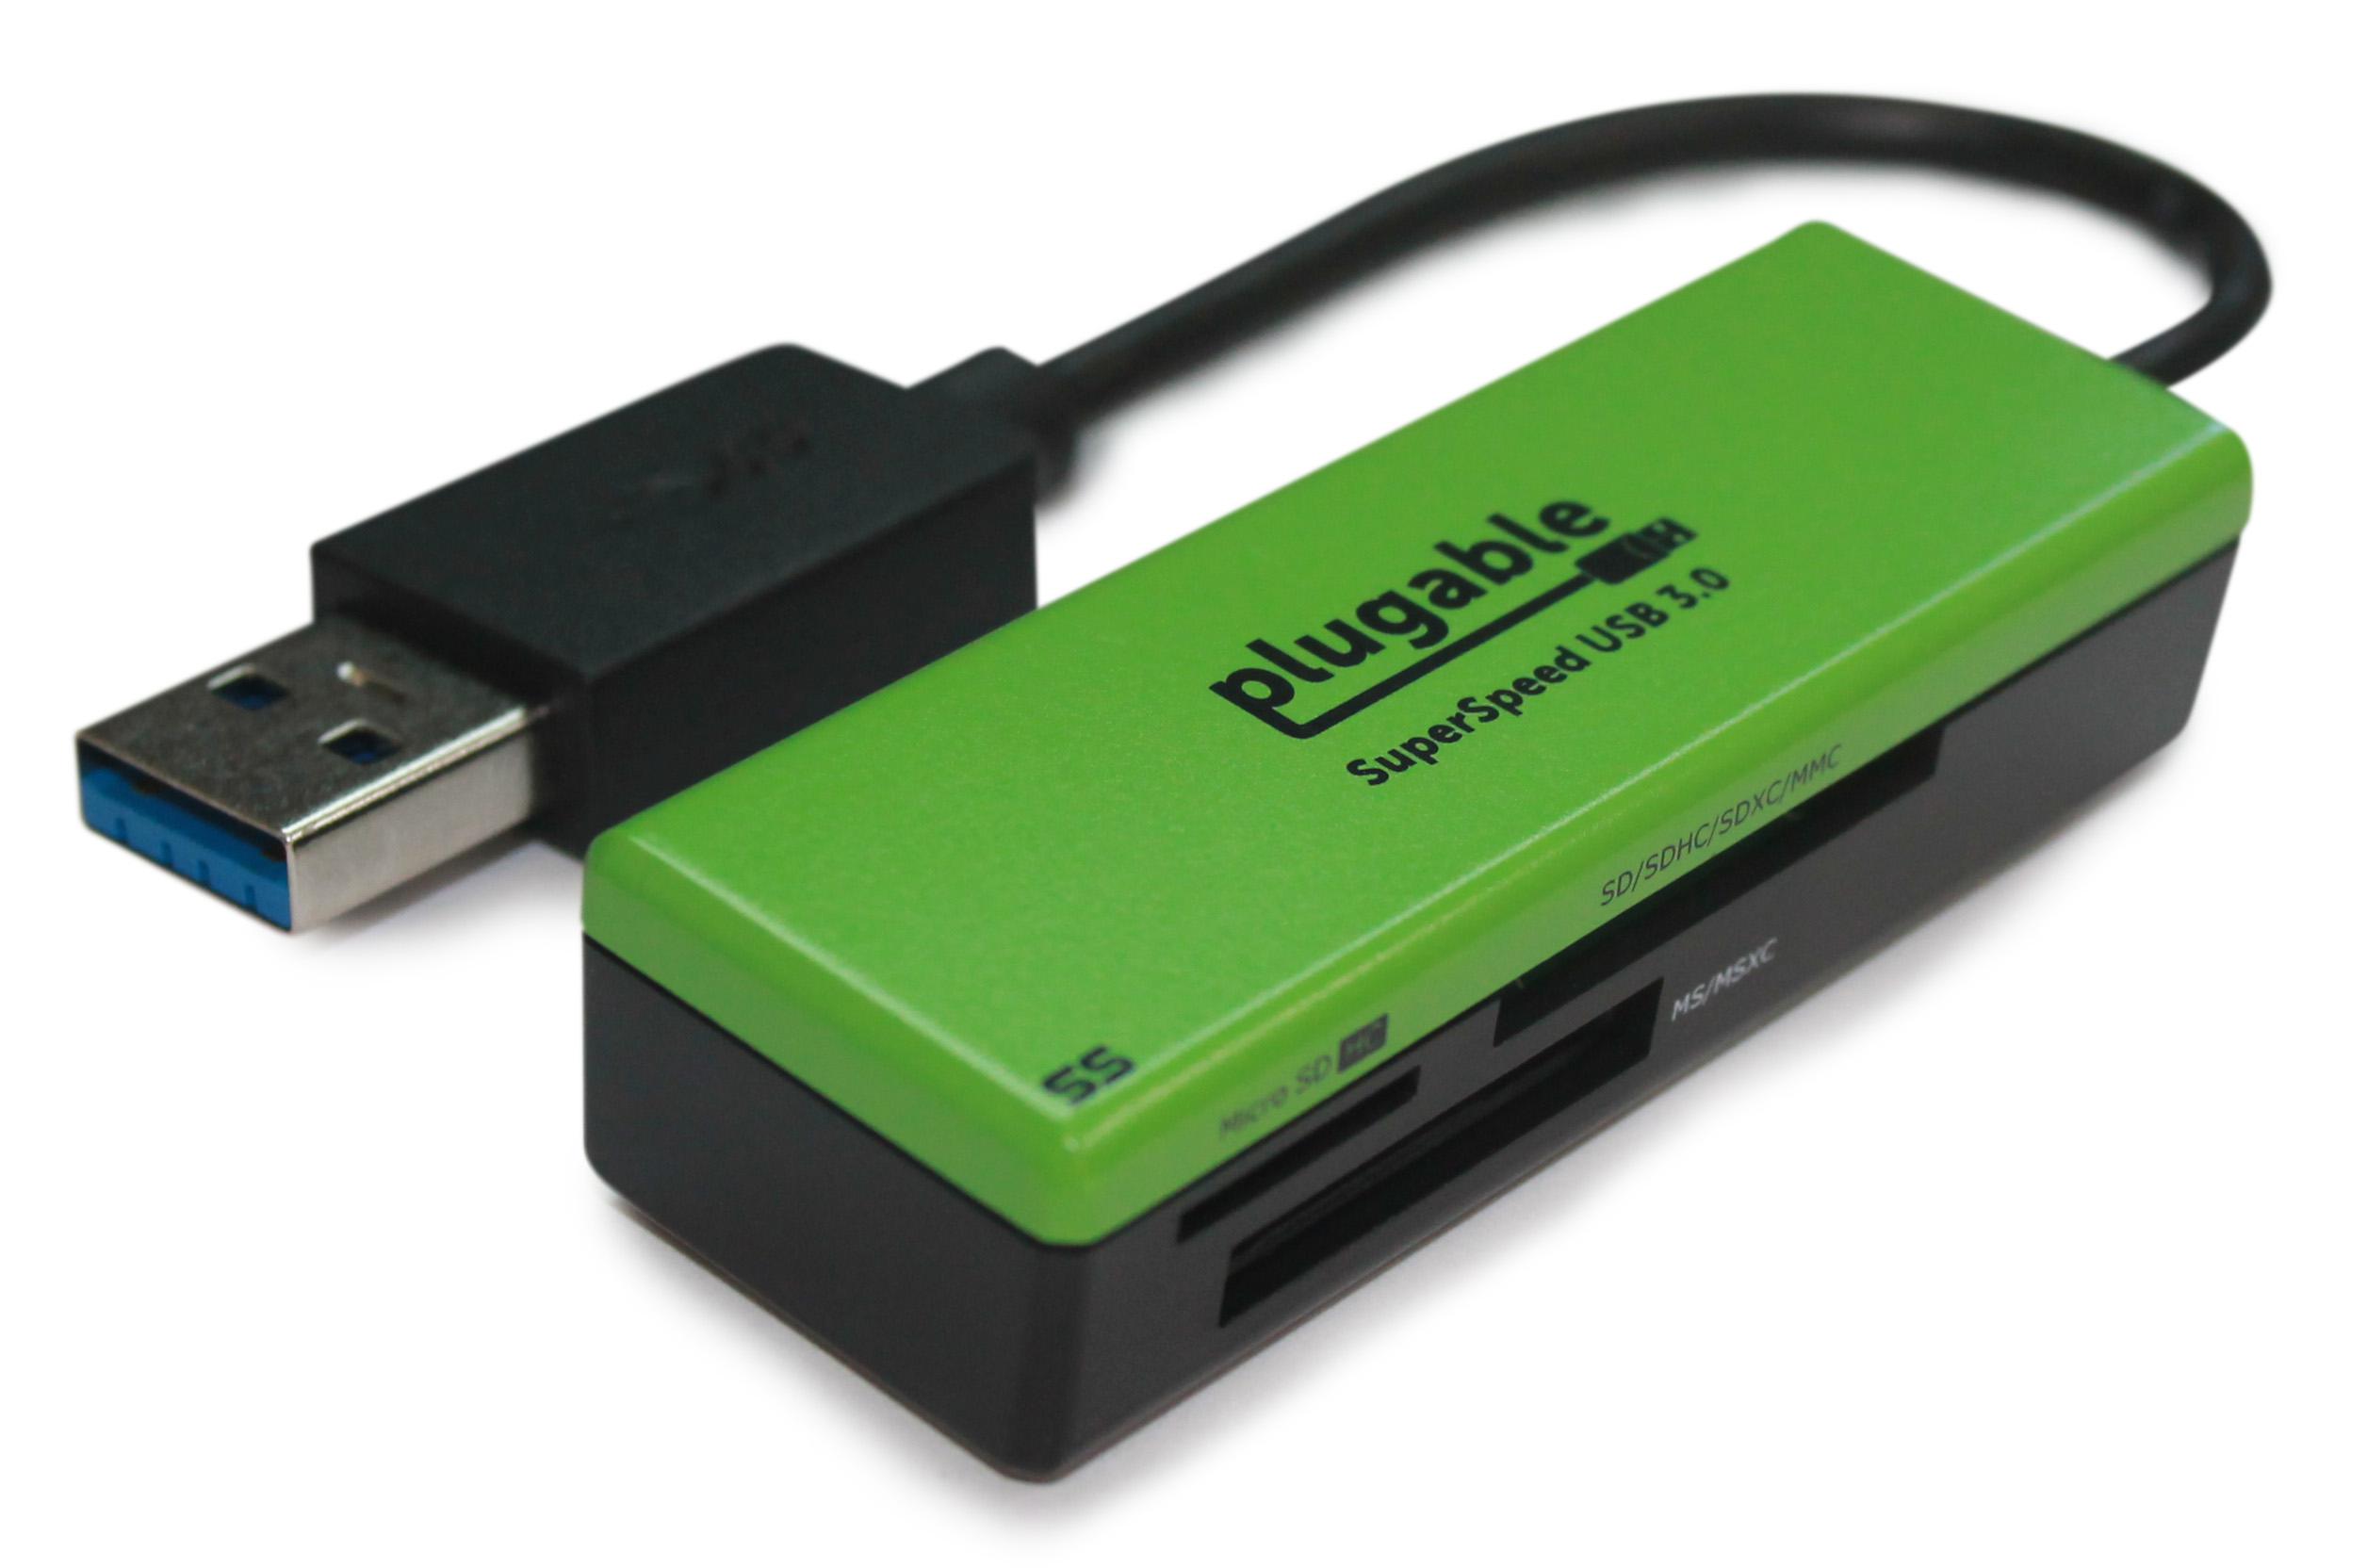 Plugable SuperSpeed USB 3.0 Flash Memory Card Reader for Windows, Mac, Linux, and Certain Android Systems - Supports SD, SDHC, SDXC, Micro SD \ T-Flash, MS, MS Pro Duo, MMC, and More - image 1 of 8